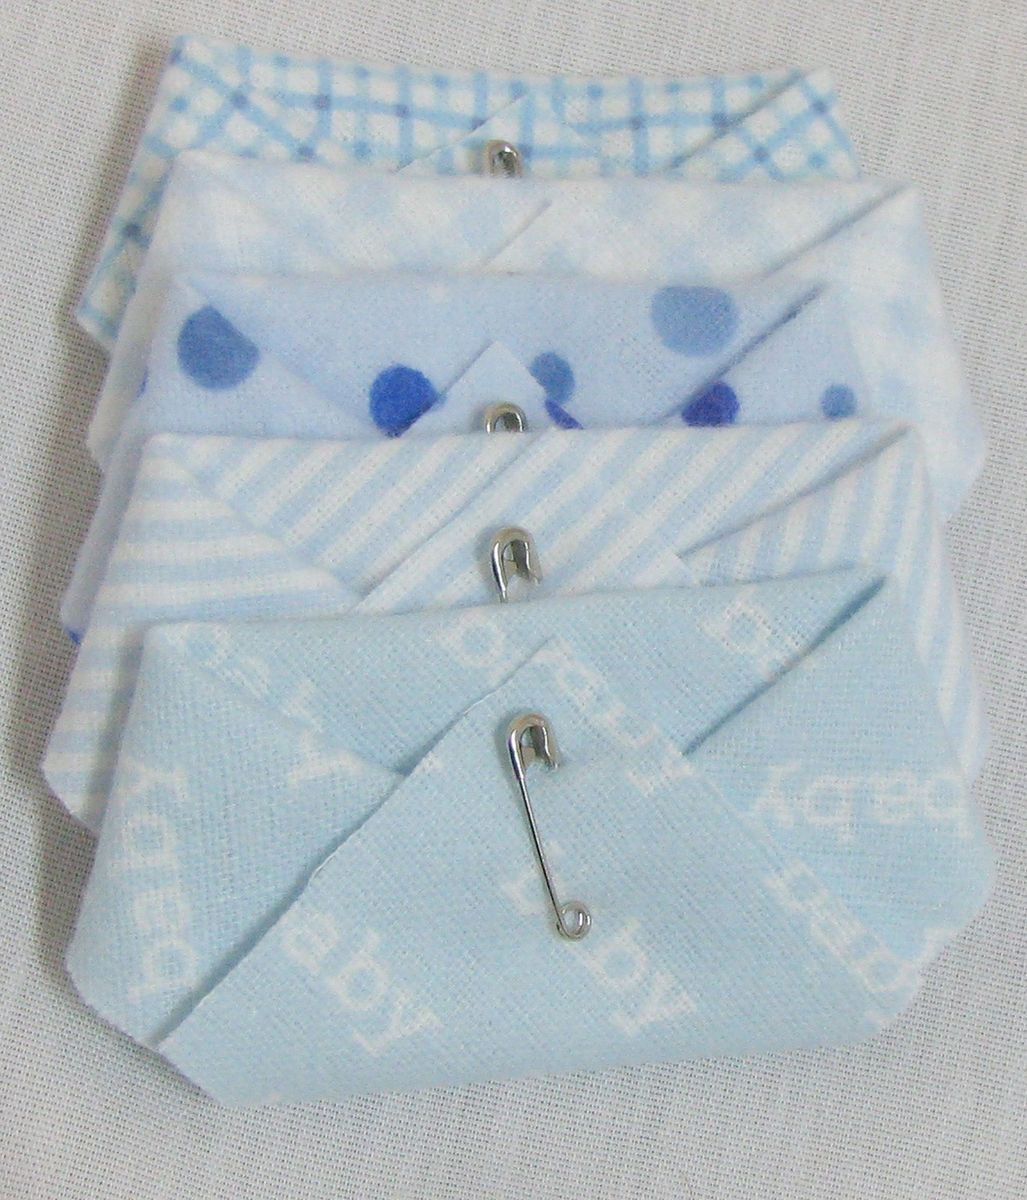 Dirty Diaper Baby Shower Game or Party Favor Boy Blue Nursery Prints